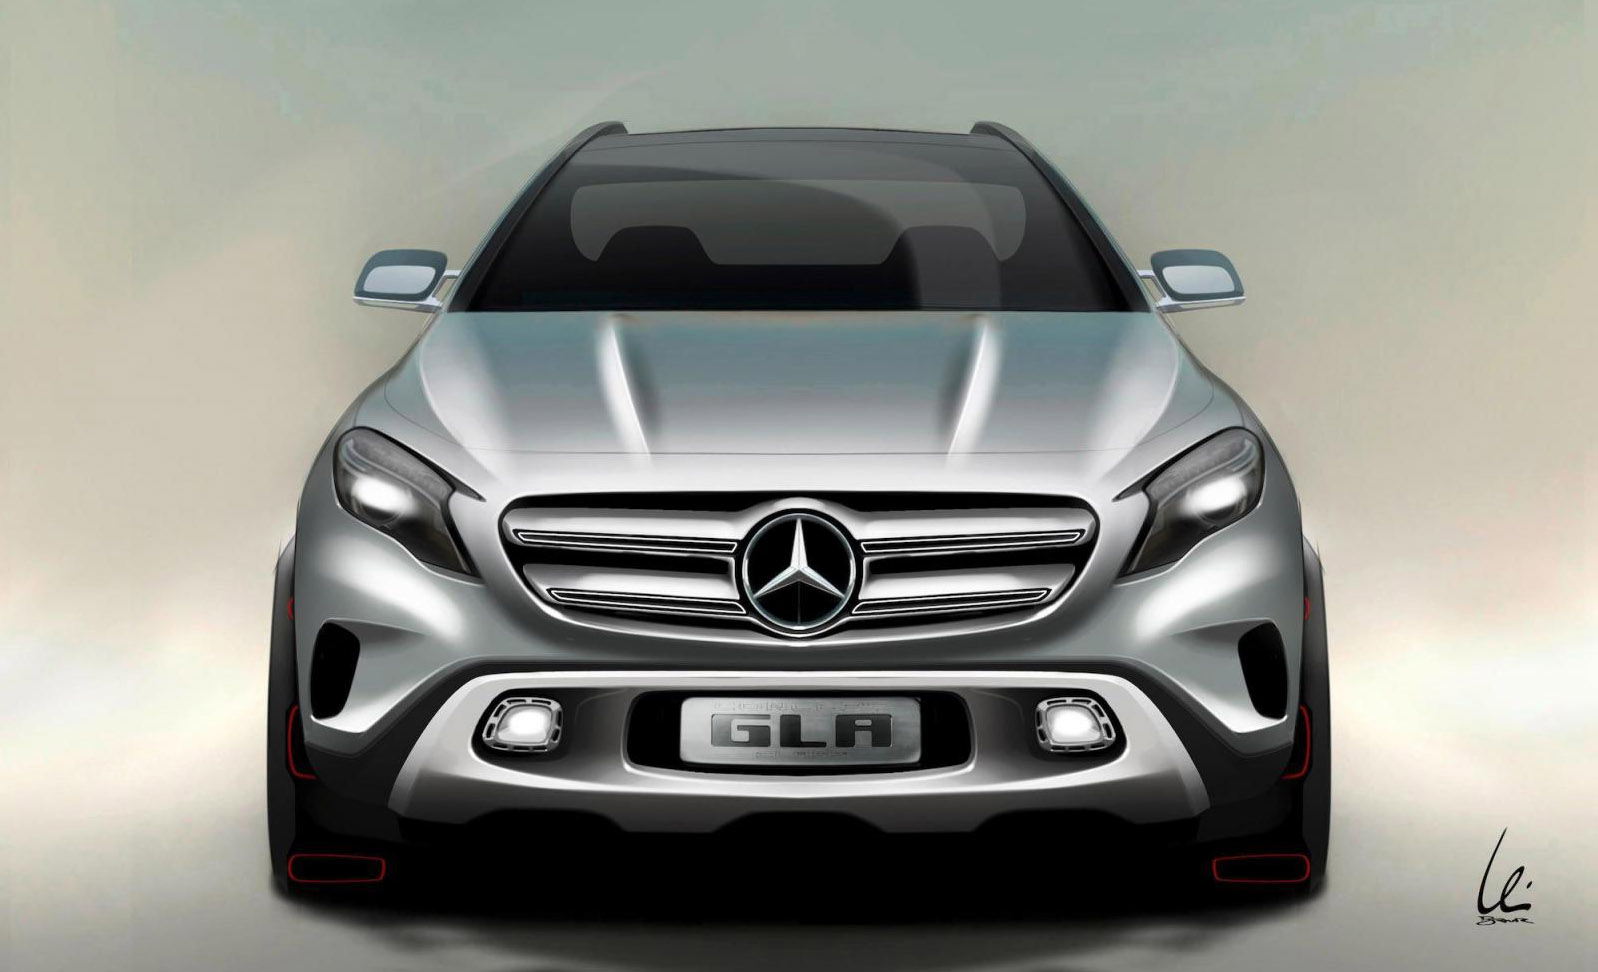 Mercedes-Benz Concept GLA revealed ahead of Shanghai debut